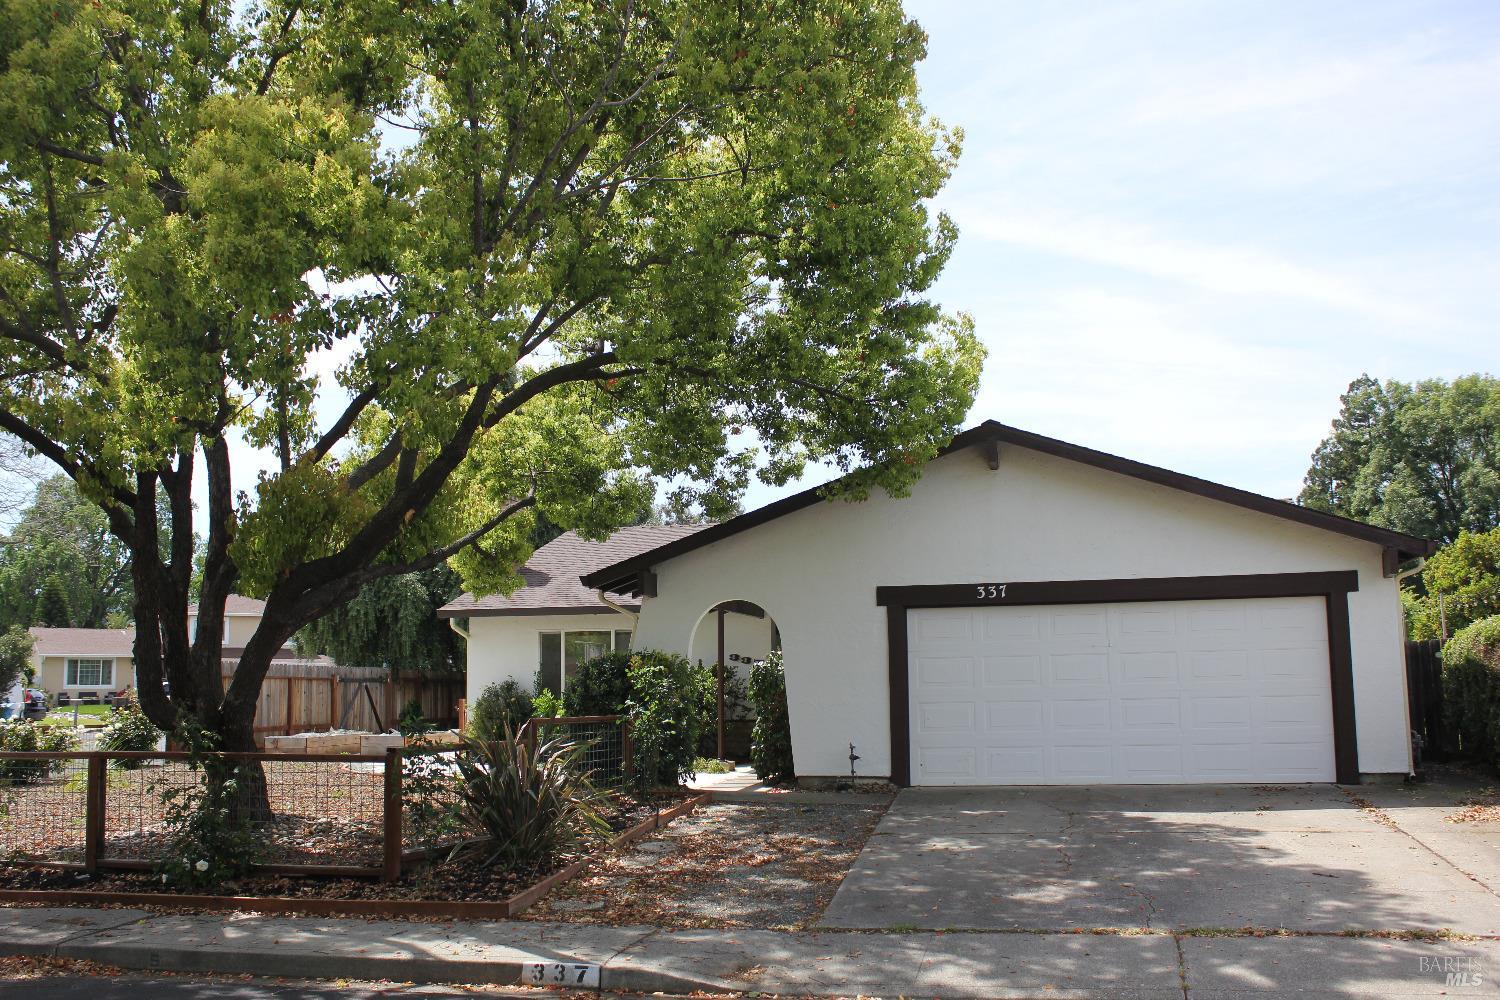 Single story with open floor plan located on a cul-de-sac corner lot.  The house features 4 bedrooms